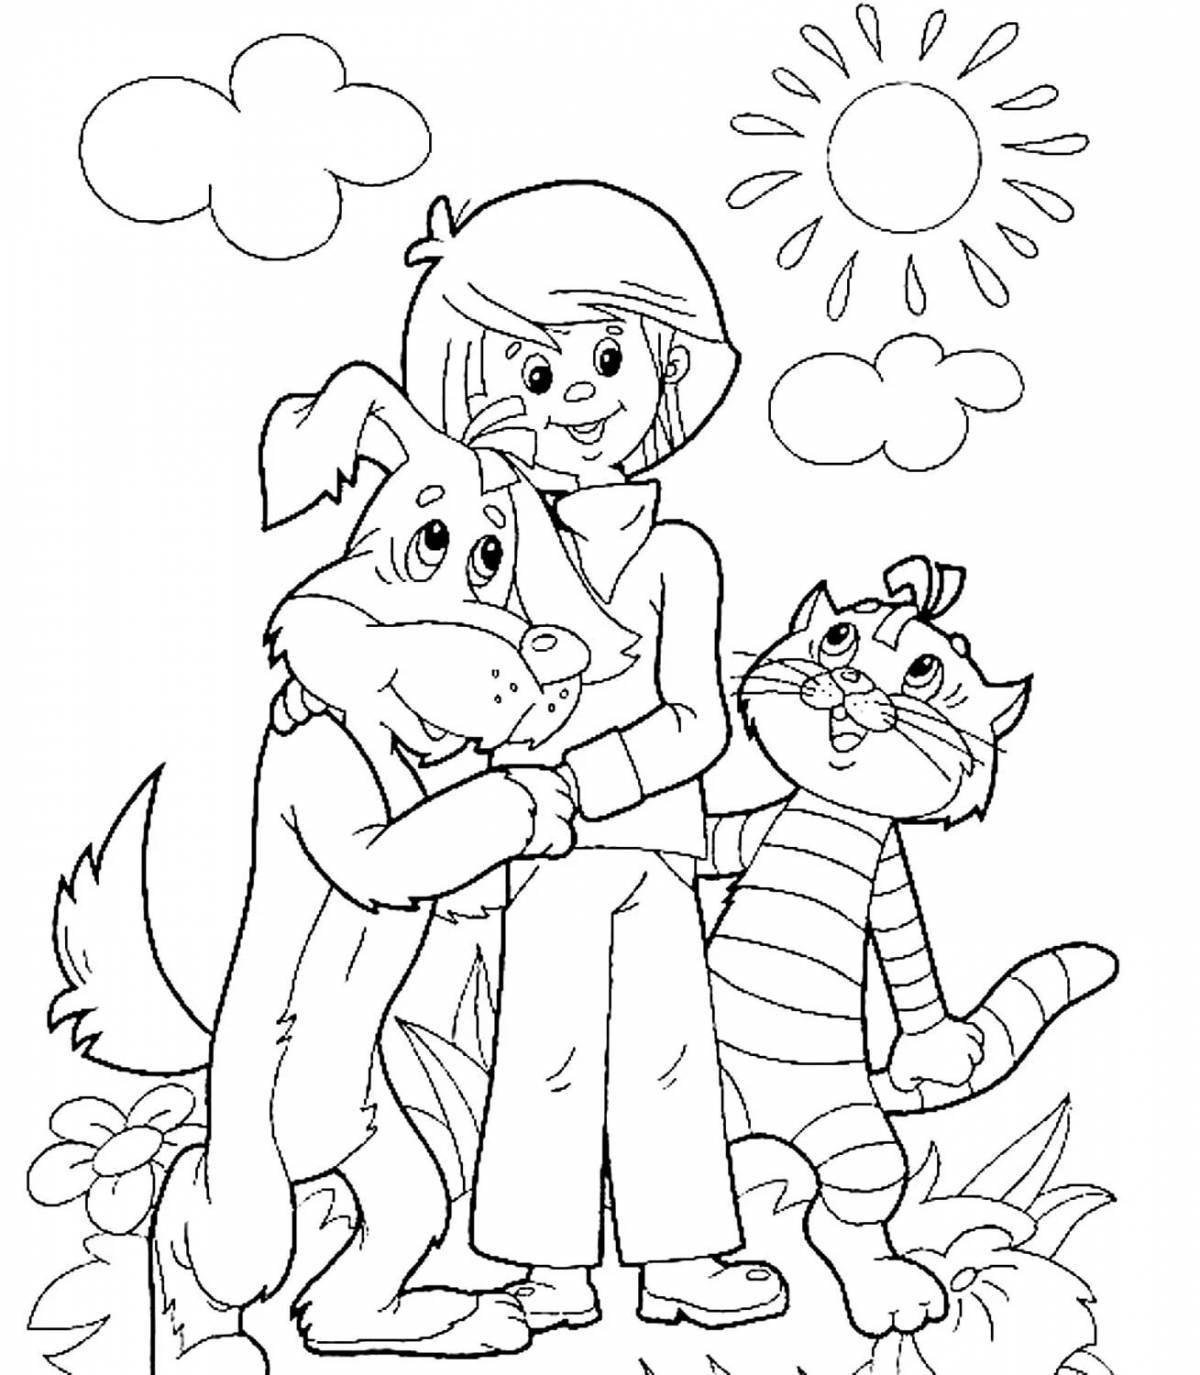 Excited uncle coloring page